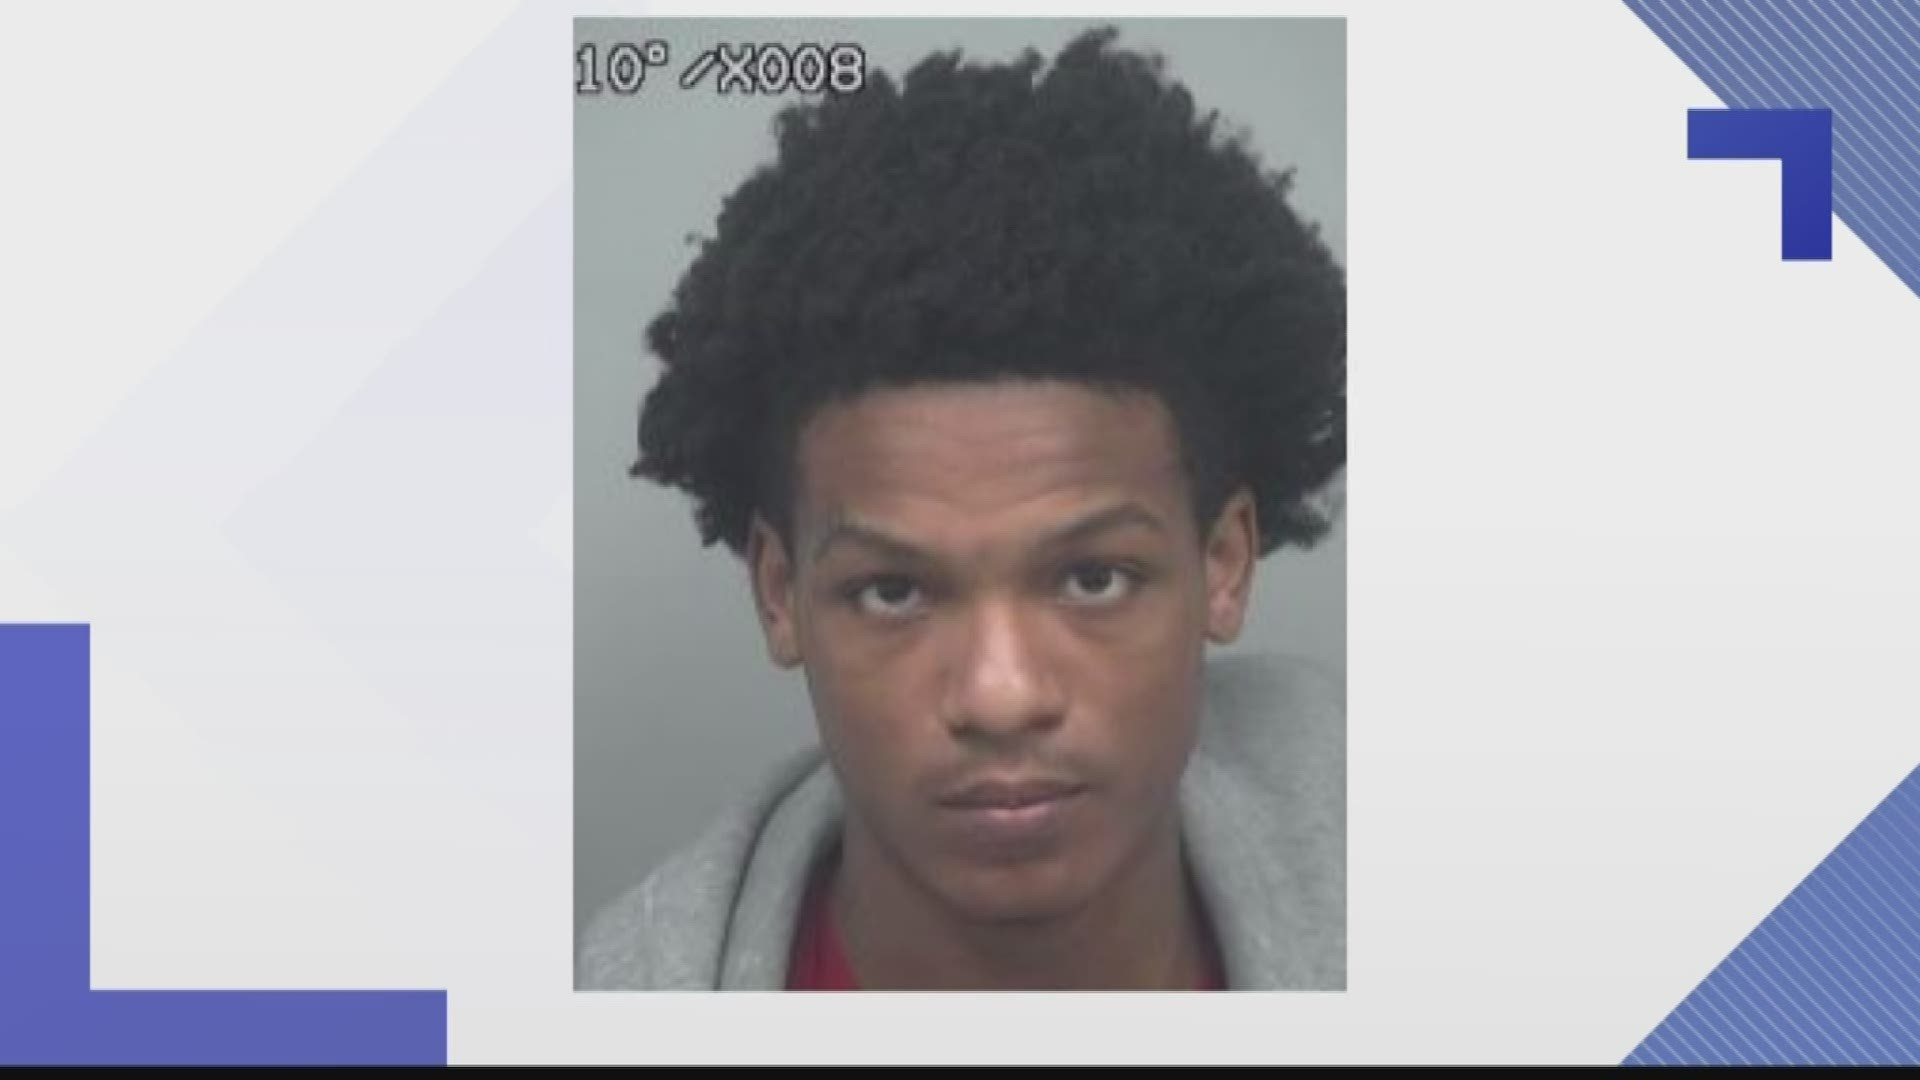 Police say 17-year-old James Robertson Jr., of Snellville, was arrested and believe the motive for the homicide is robbery.